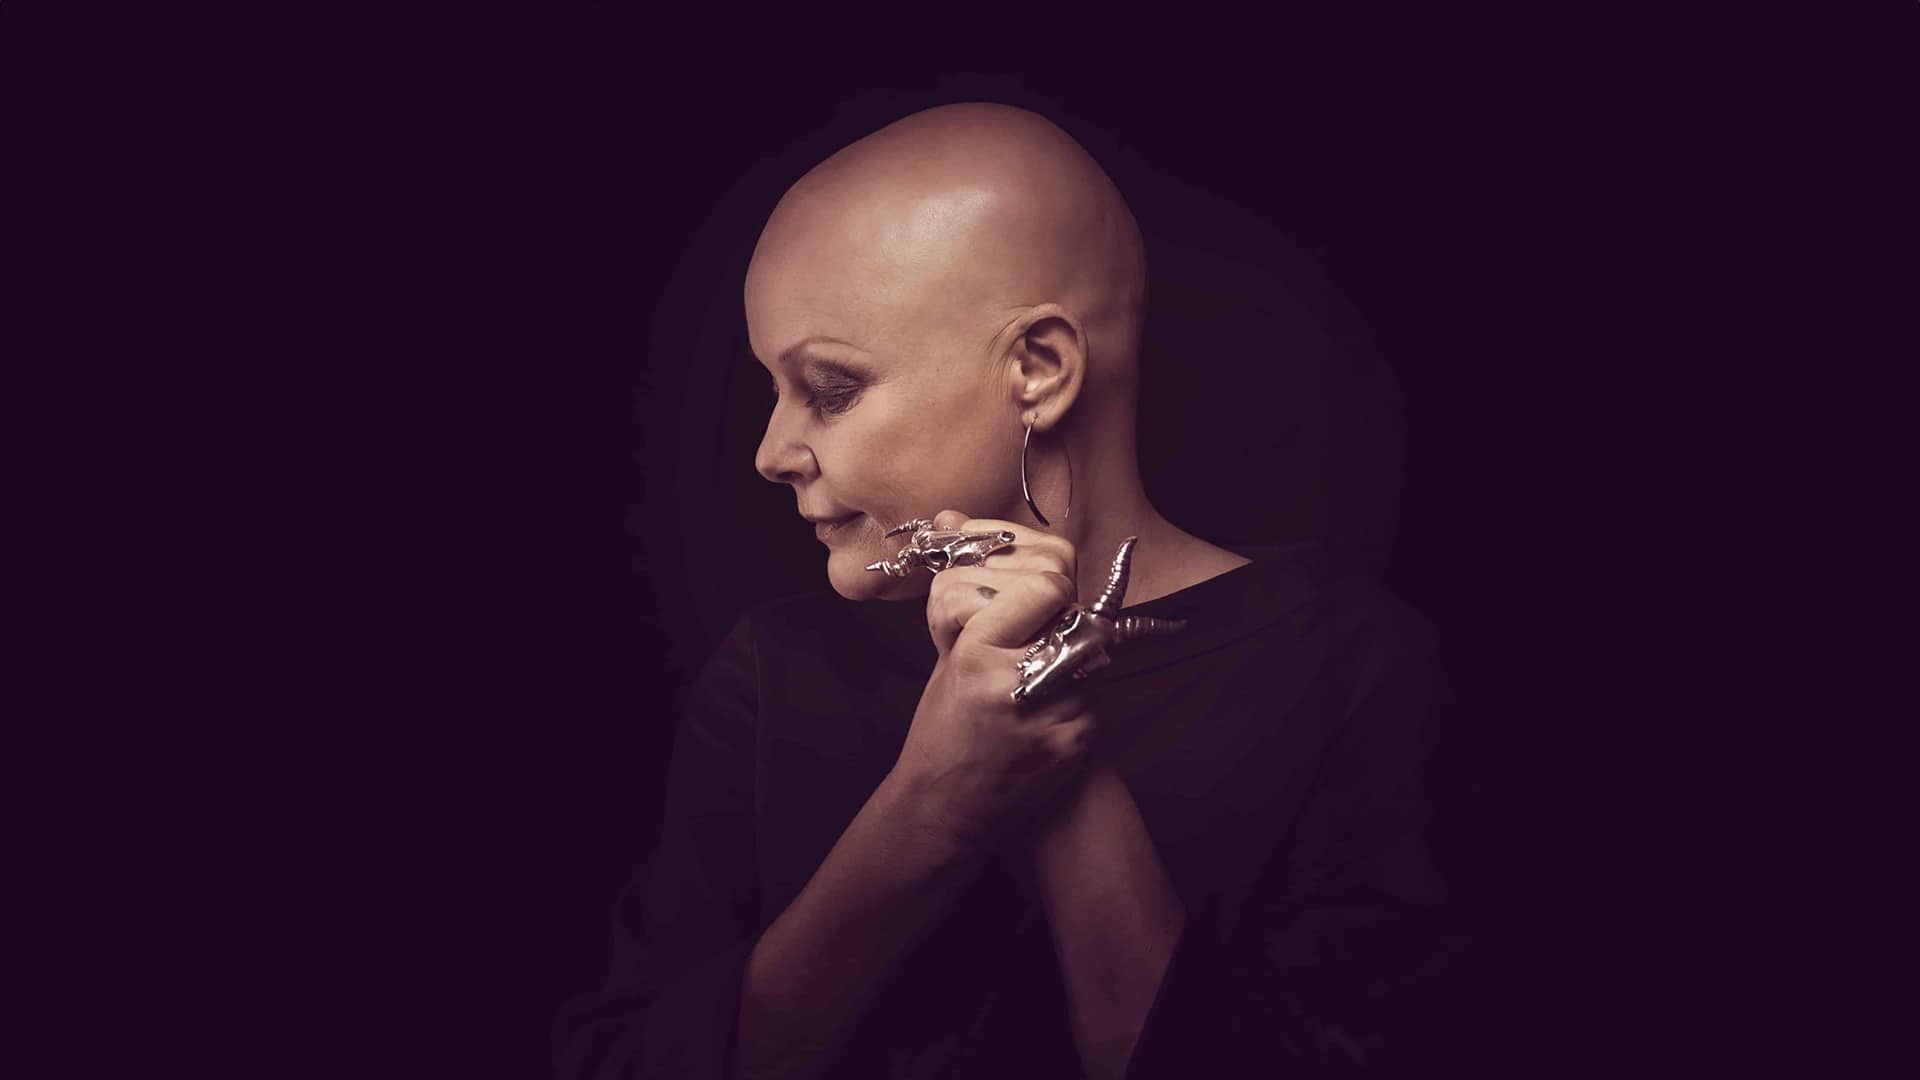 Black background. Gail Porter, a middle aged white woman with alopecia, faces the camera with her body but looks over her right shoulder, clasping her hands together. She is wearing a dark purple top, and sheep skull-shaped rings on her middle fingers